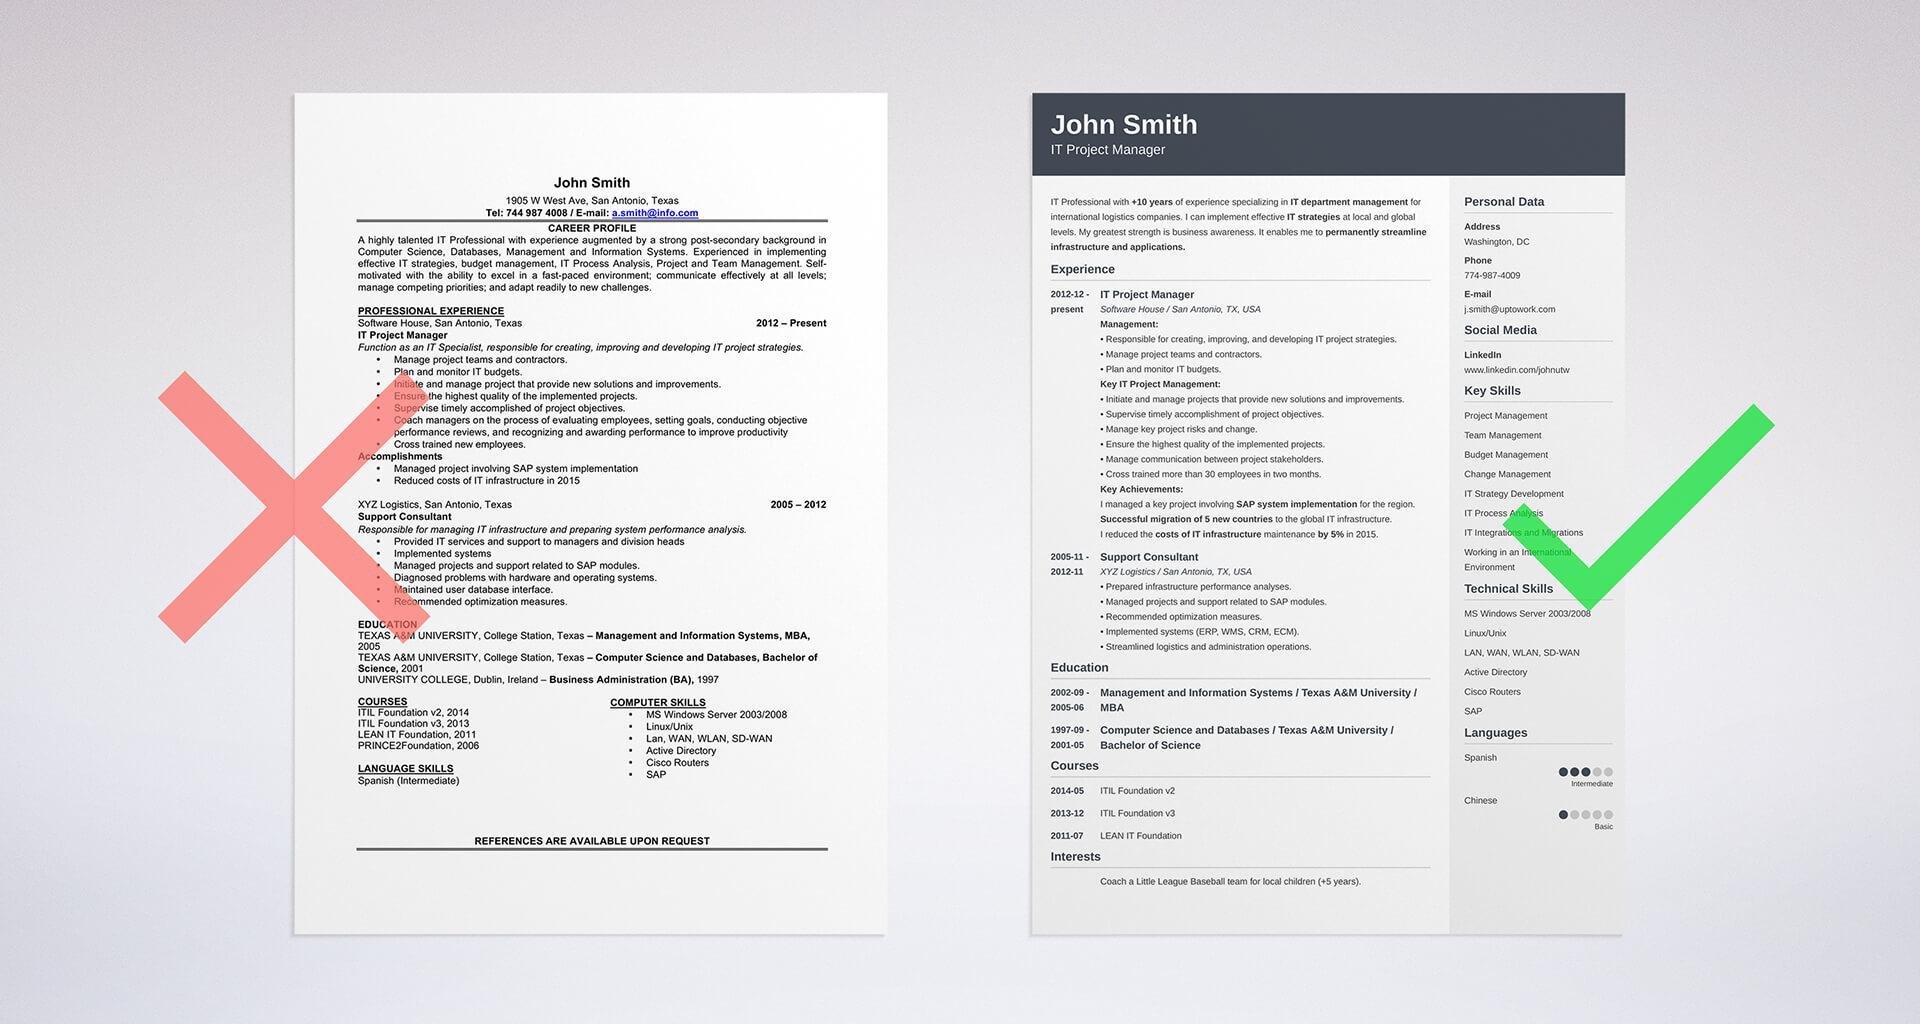 How to Put Your Education on a Resume [Tips & Examples]